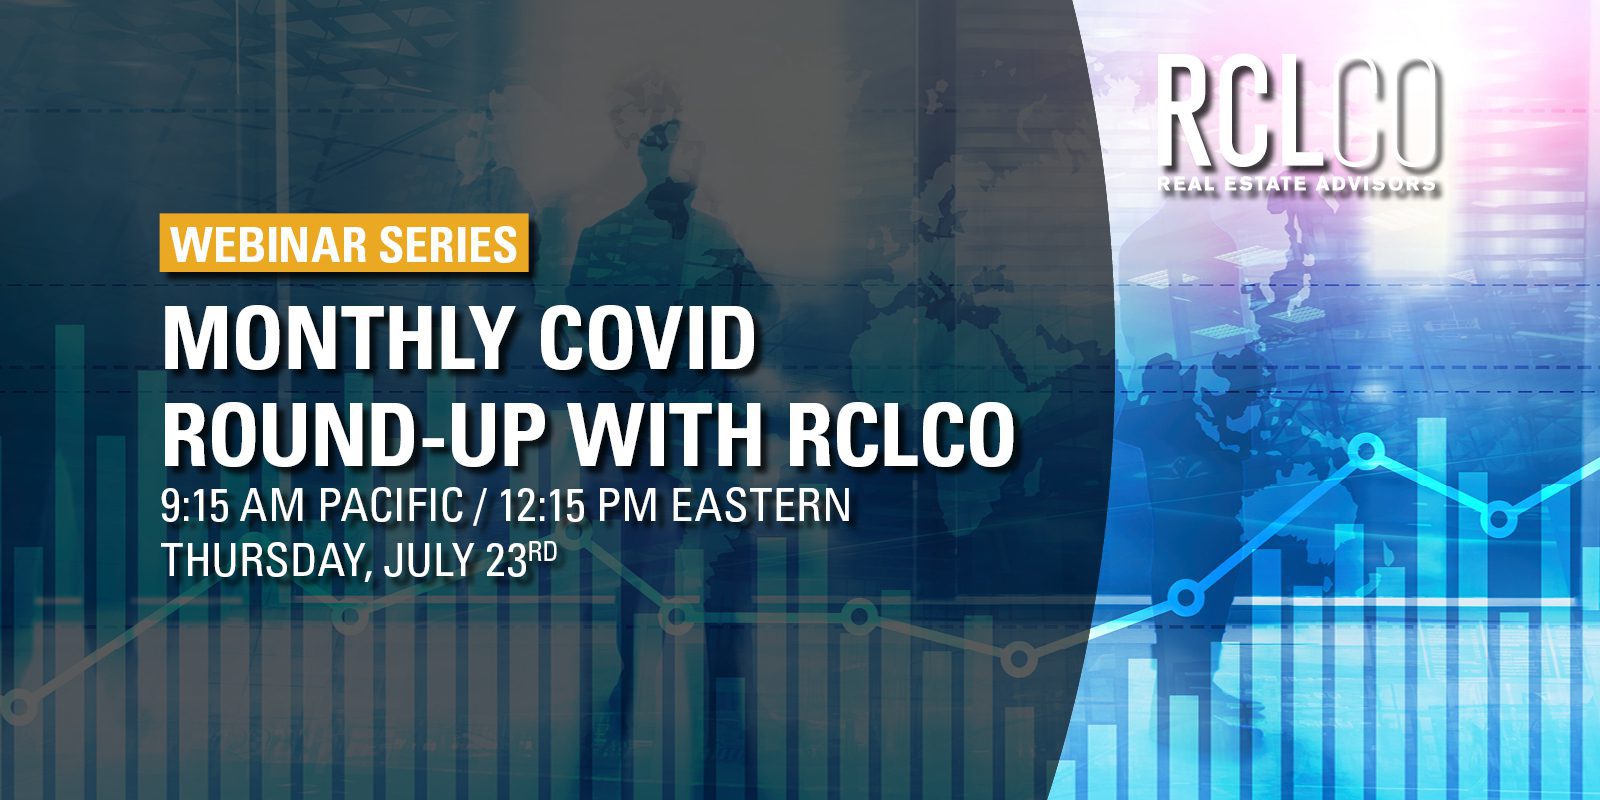 RCLCO COVID Round-Up: July 23, 2020